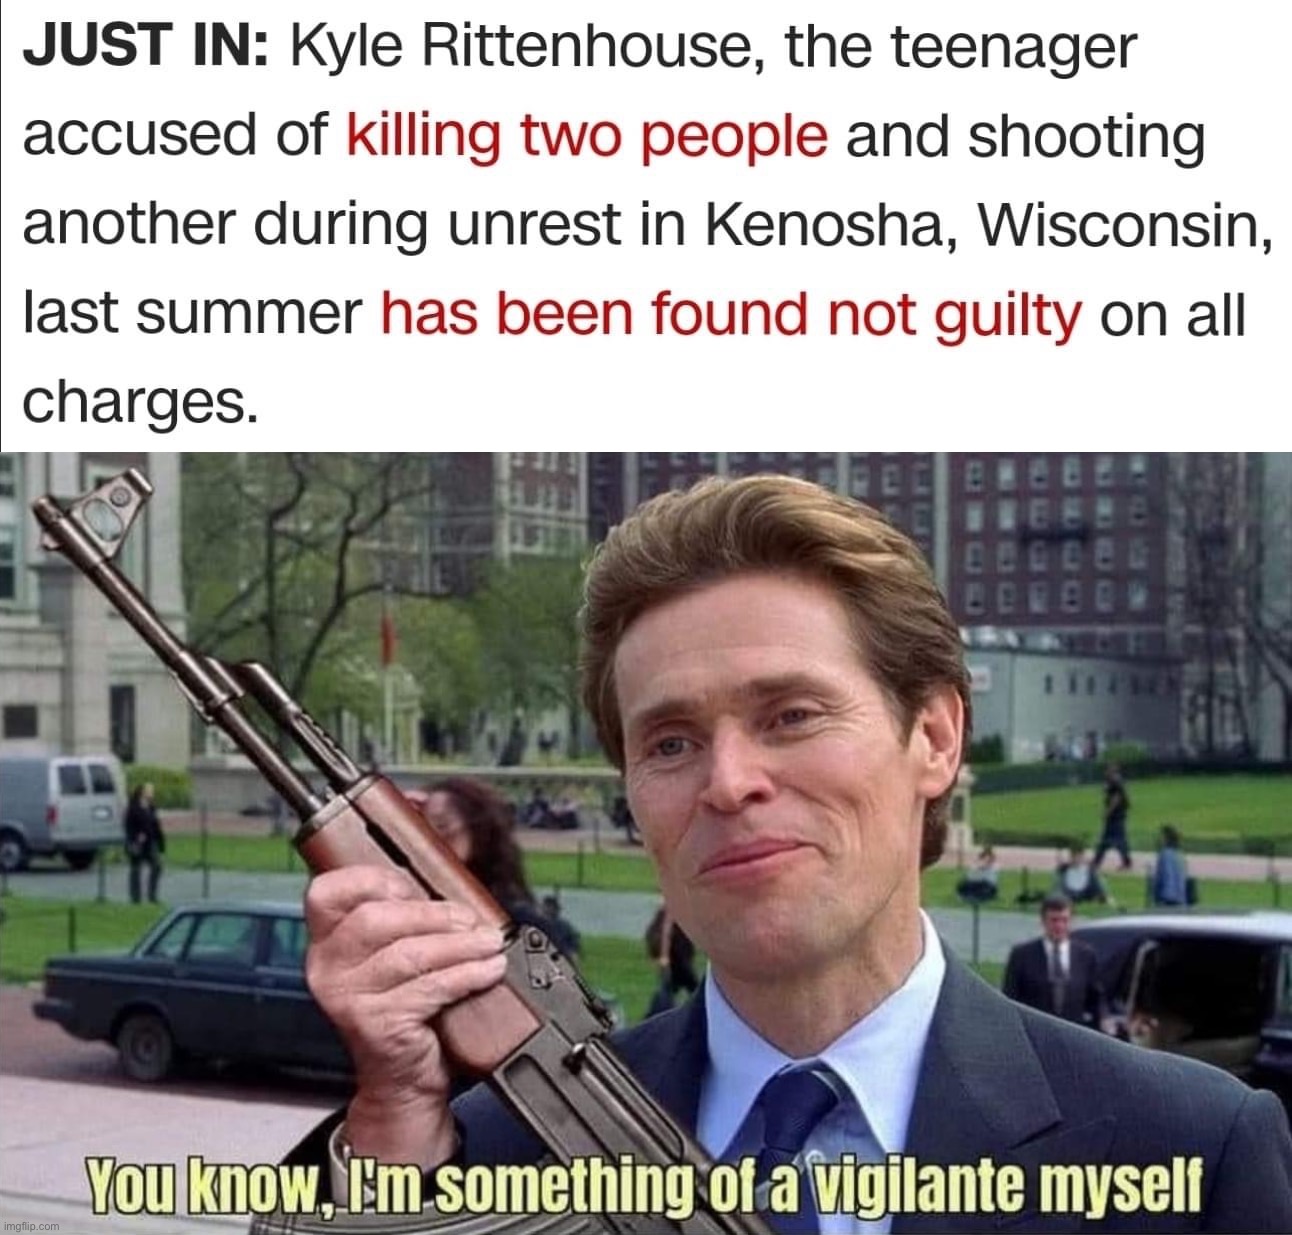 Feeling cute, might go commit a self-defense | image tagged in kyle rittenhouse acquitted,you know i m something of a vigilante myself,self-defense,self defense,kyle rittenhouse,vigilante | made w/ Imgflip meme maker